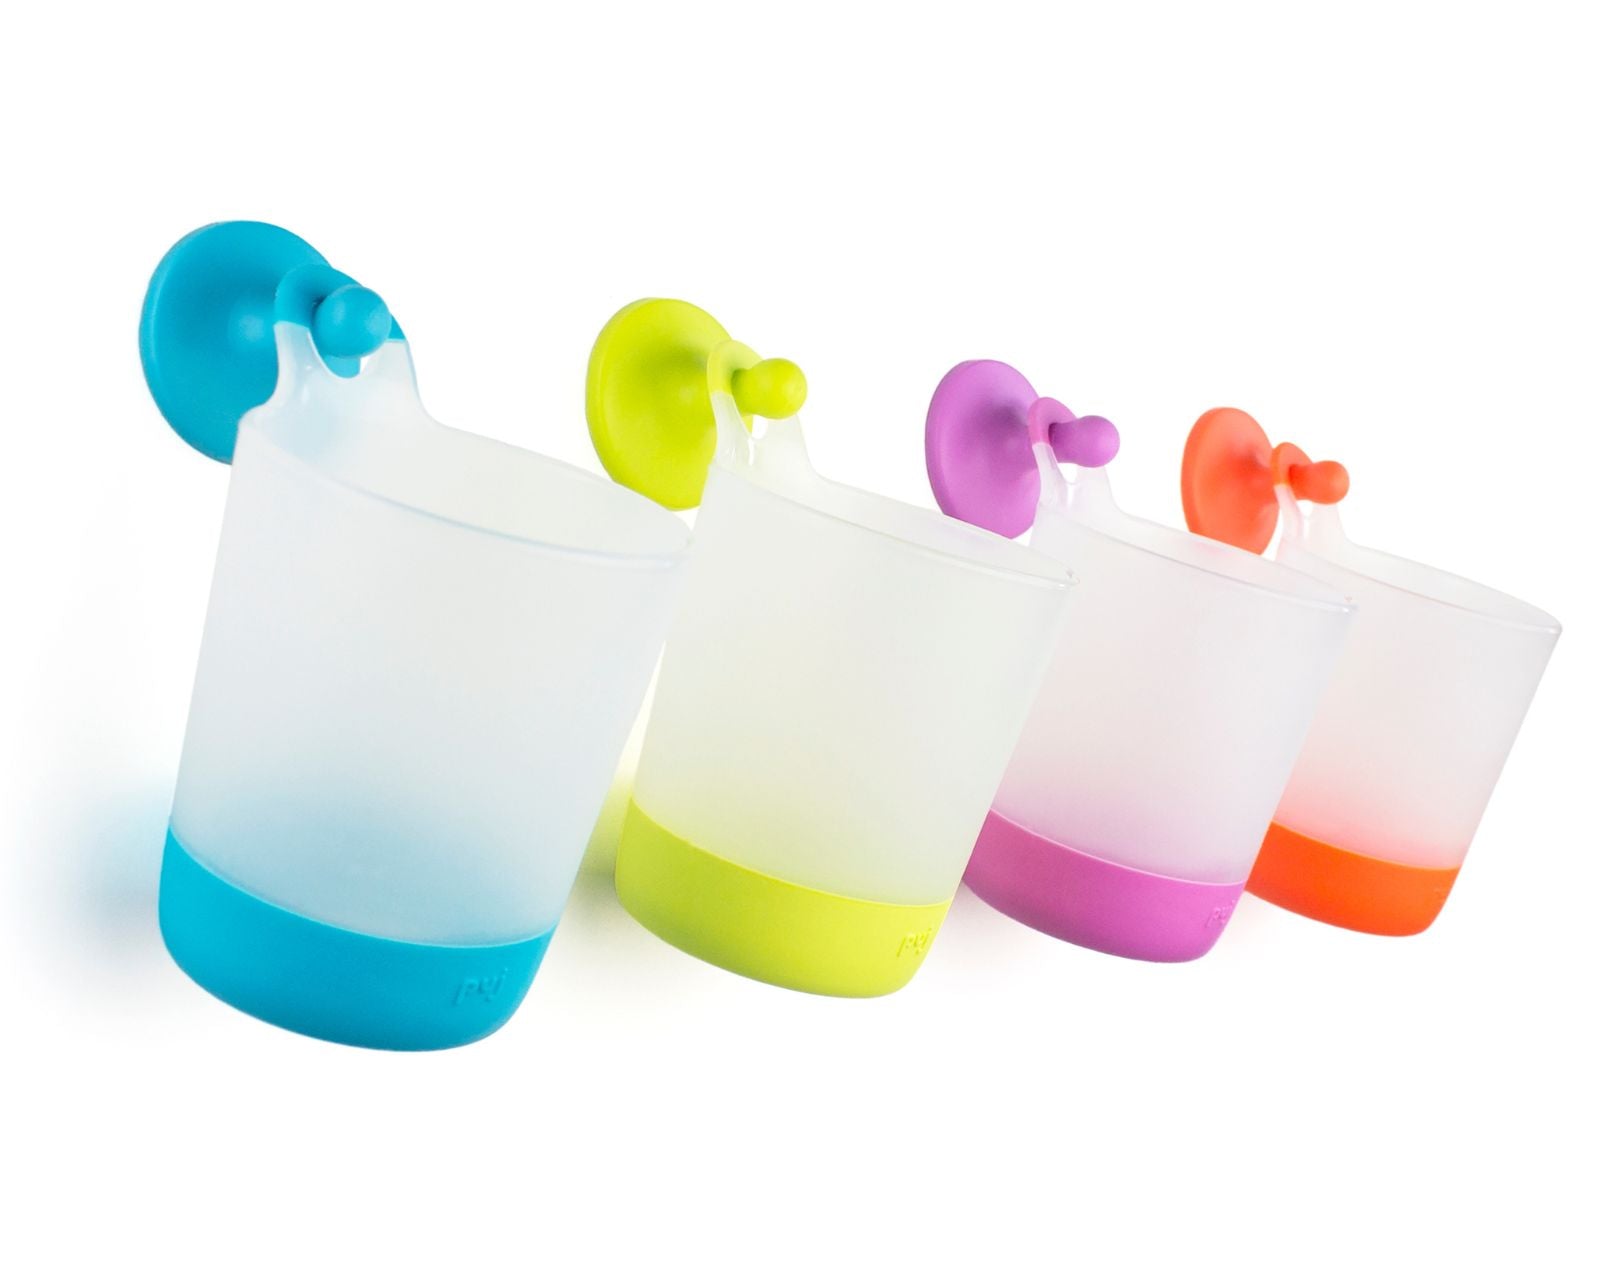 Puj Phillup - Hangable Kid's Cups (4-Pack)